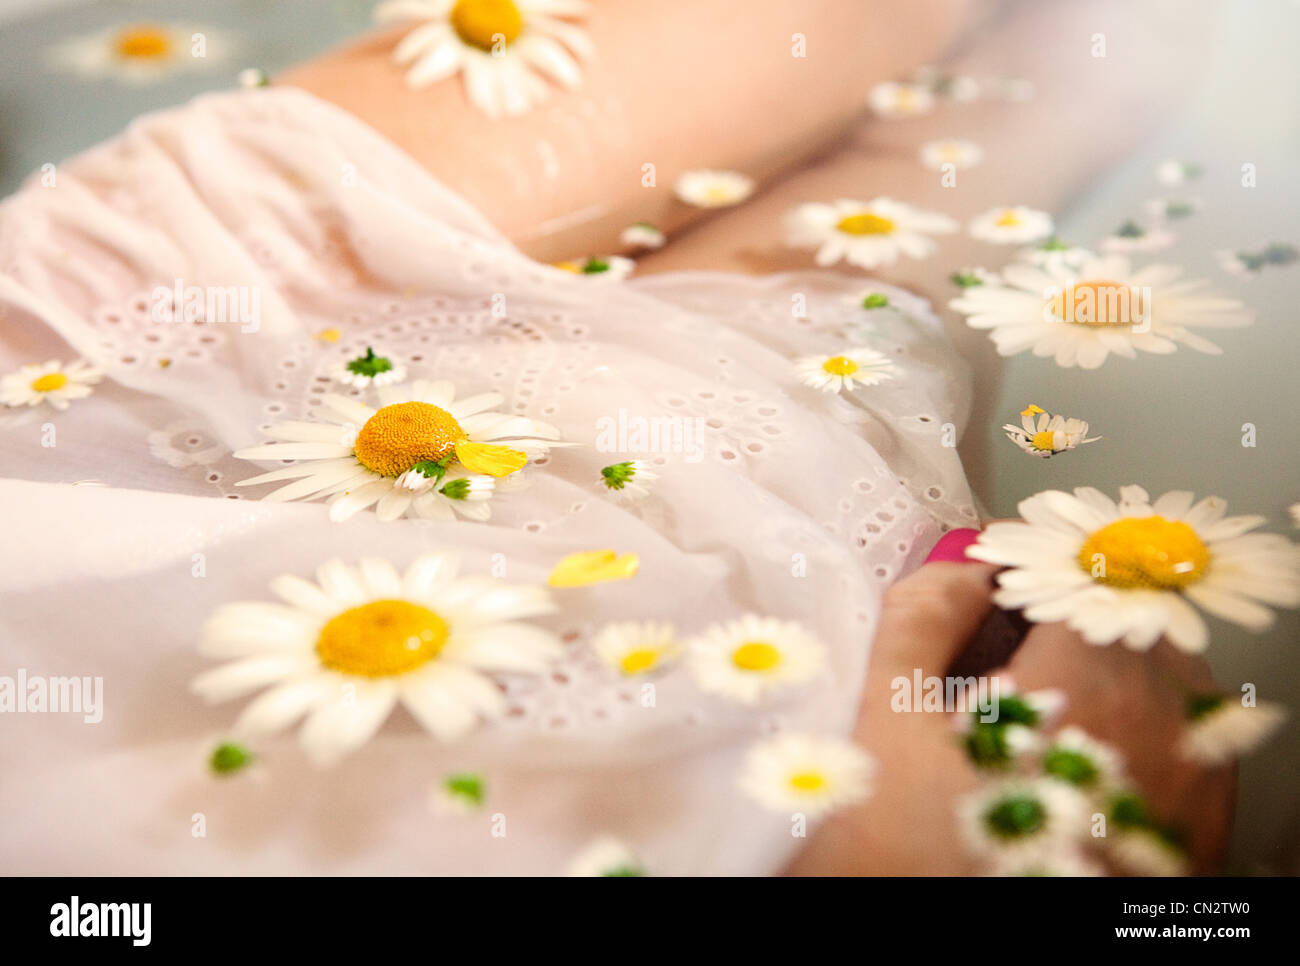 Woman in water with daisies floating on surface Stock Photo